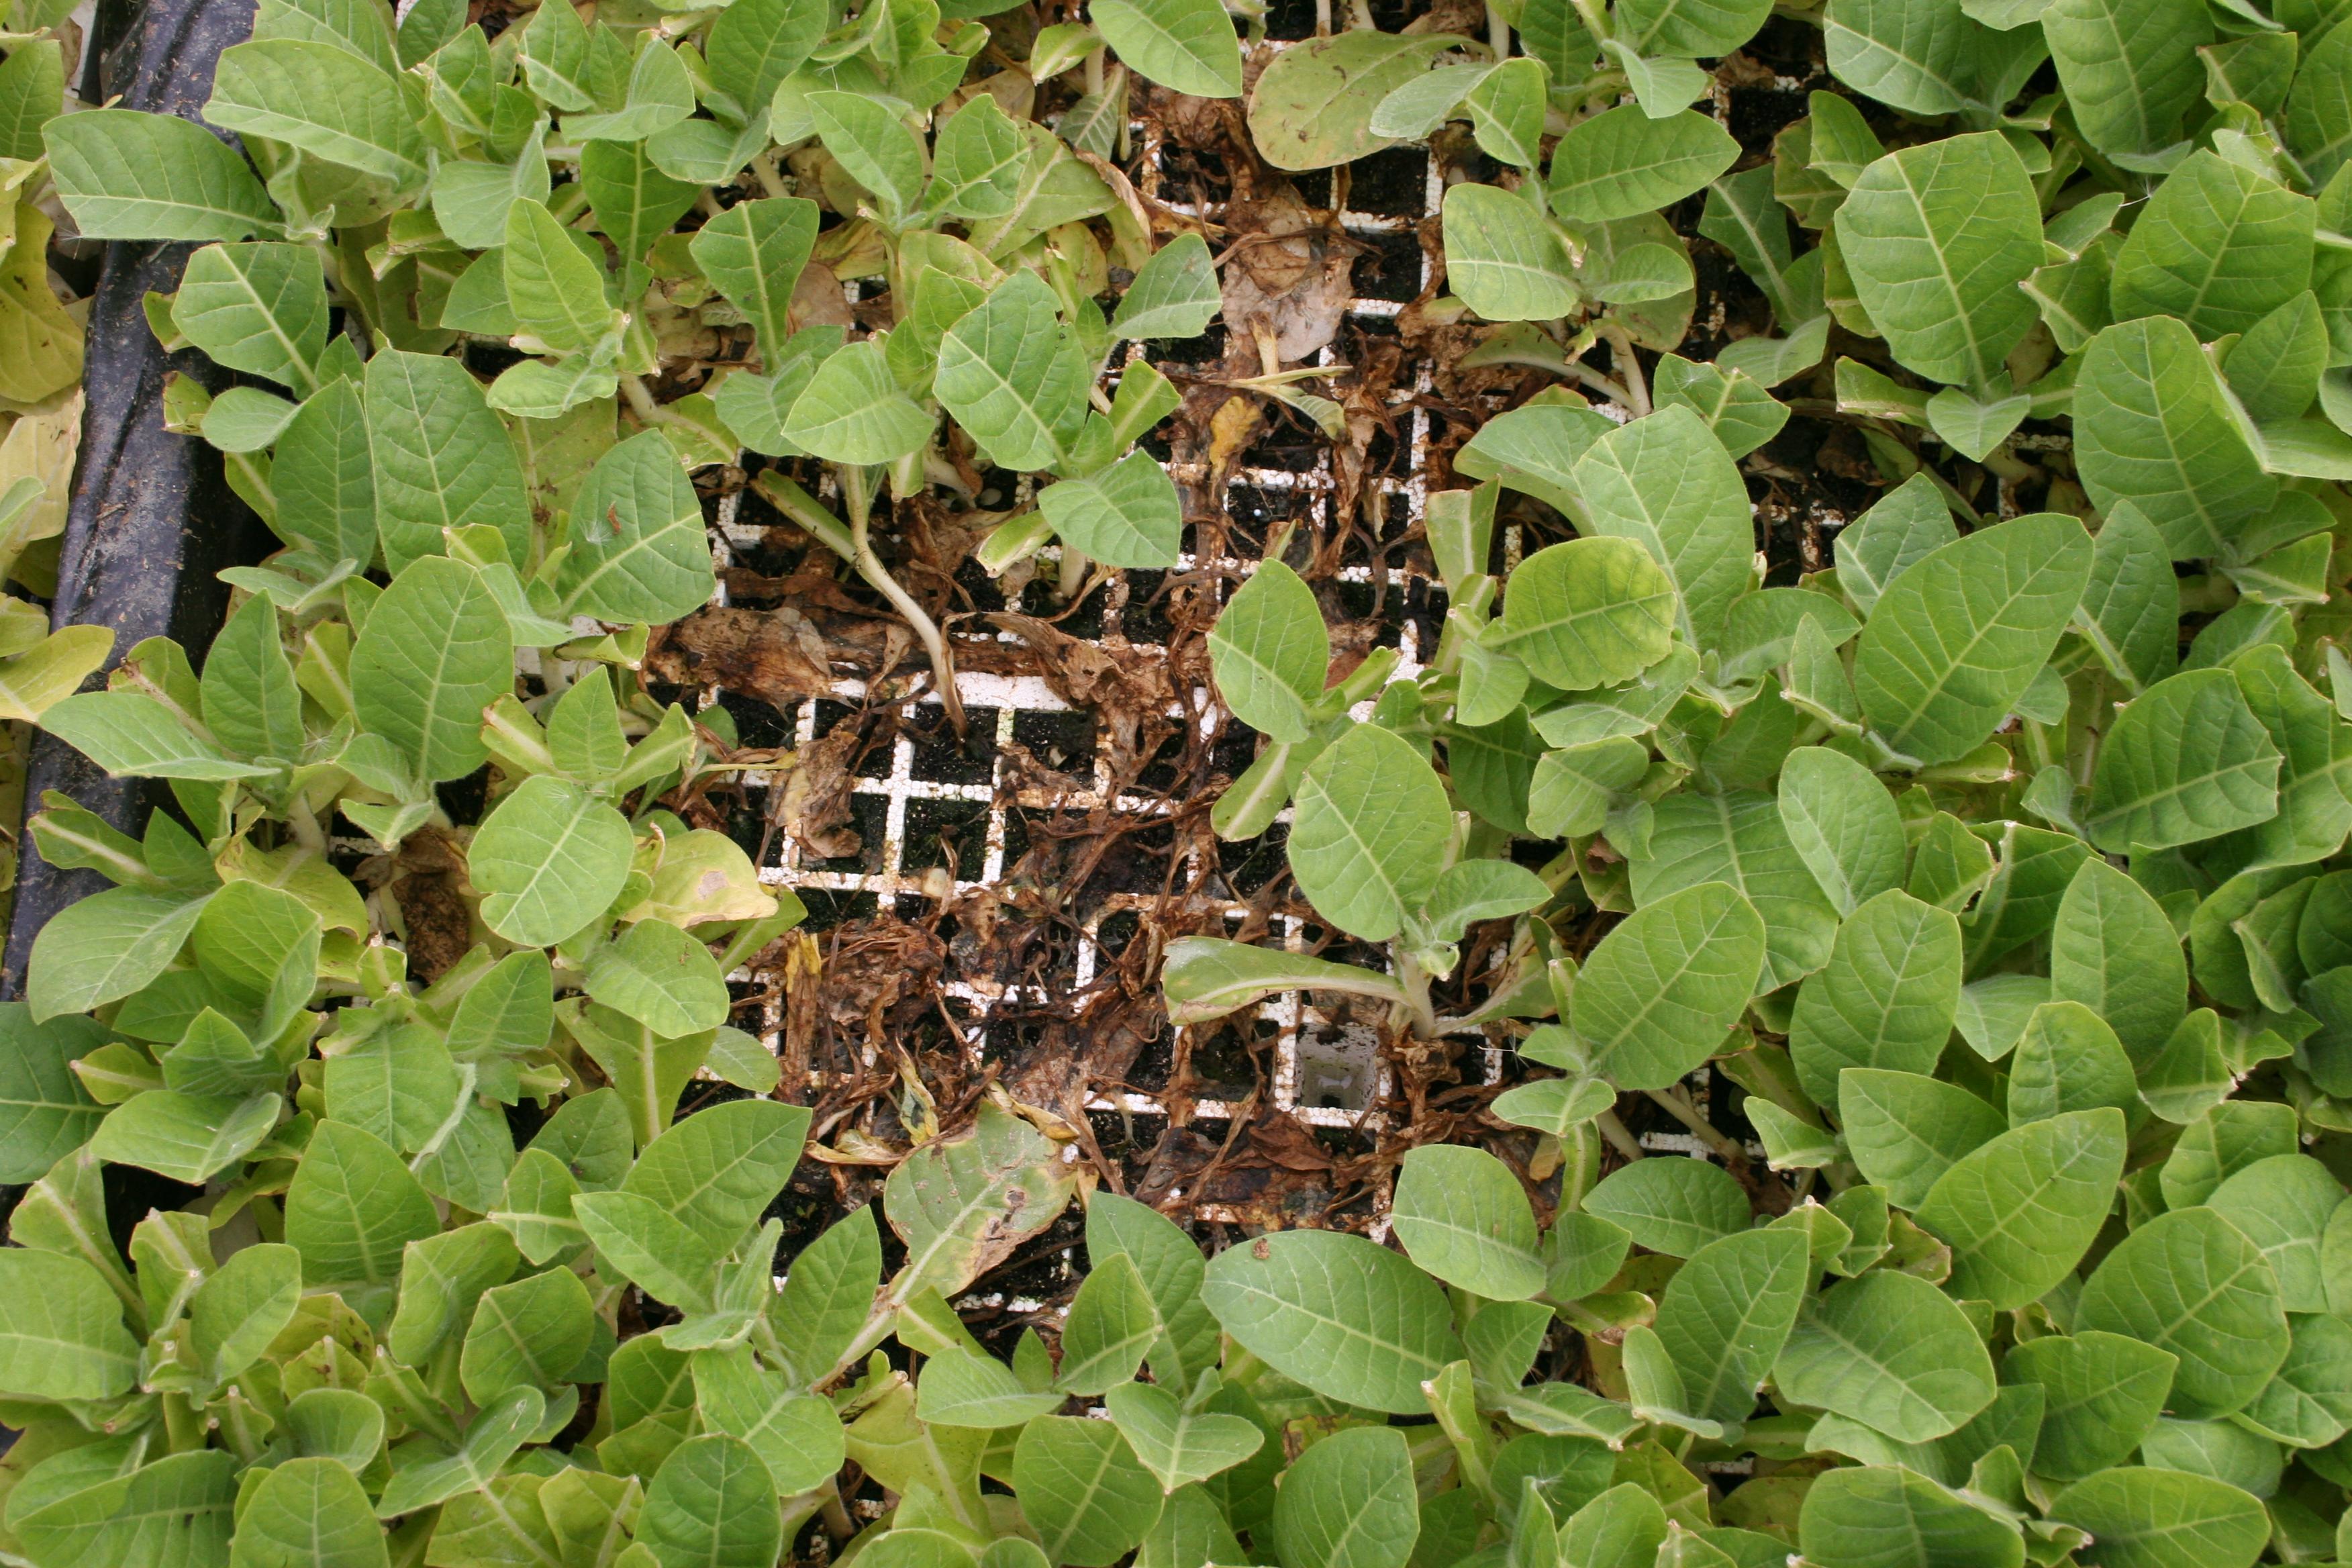 Complete collapse and death of seedlings may result from infections. (Photo: Kenneth Seebold, UK)